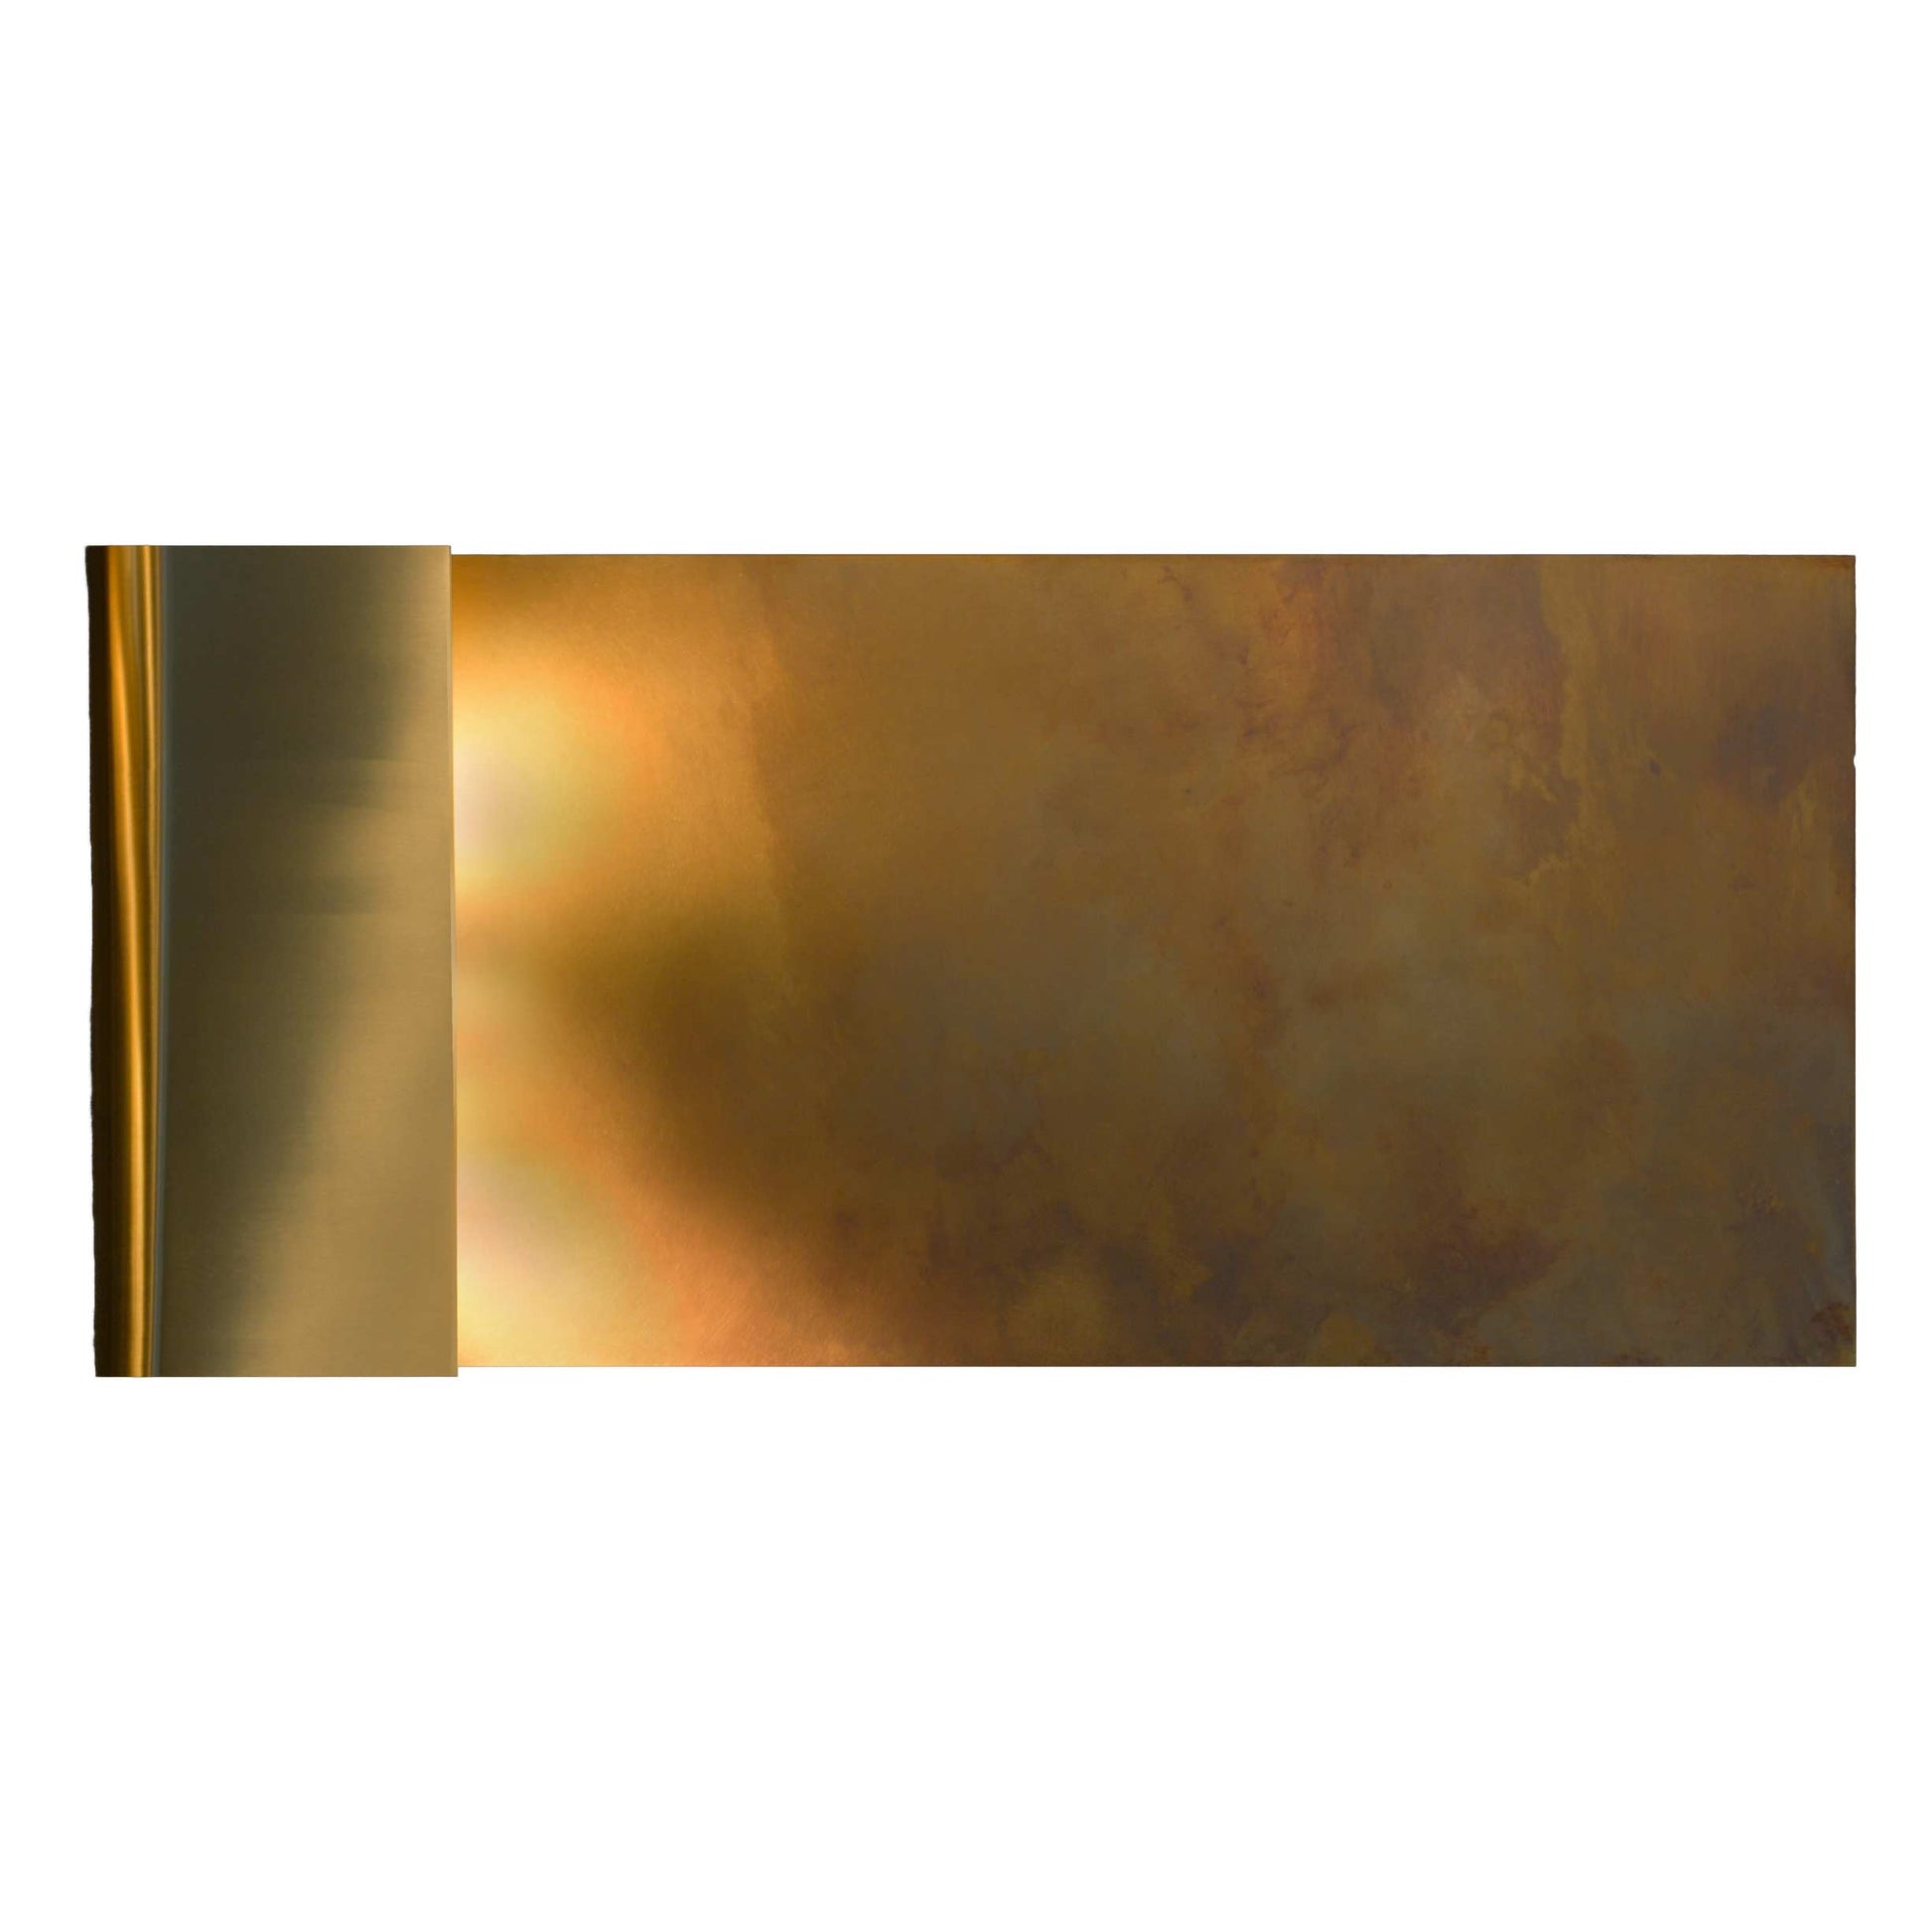 Switching on the ARTEM brass wall light creates an intense display of colour, pattern and detail